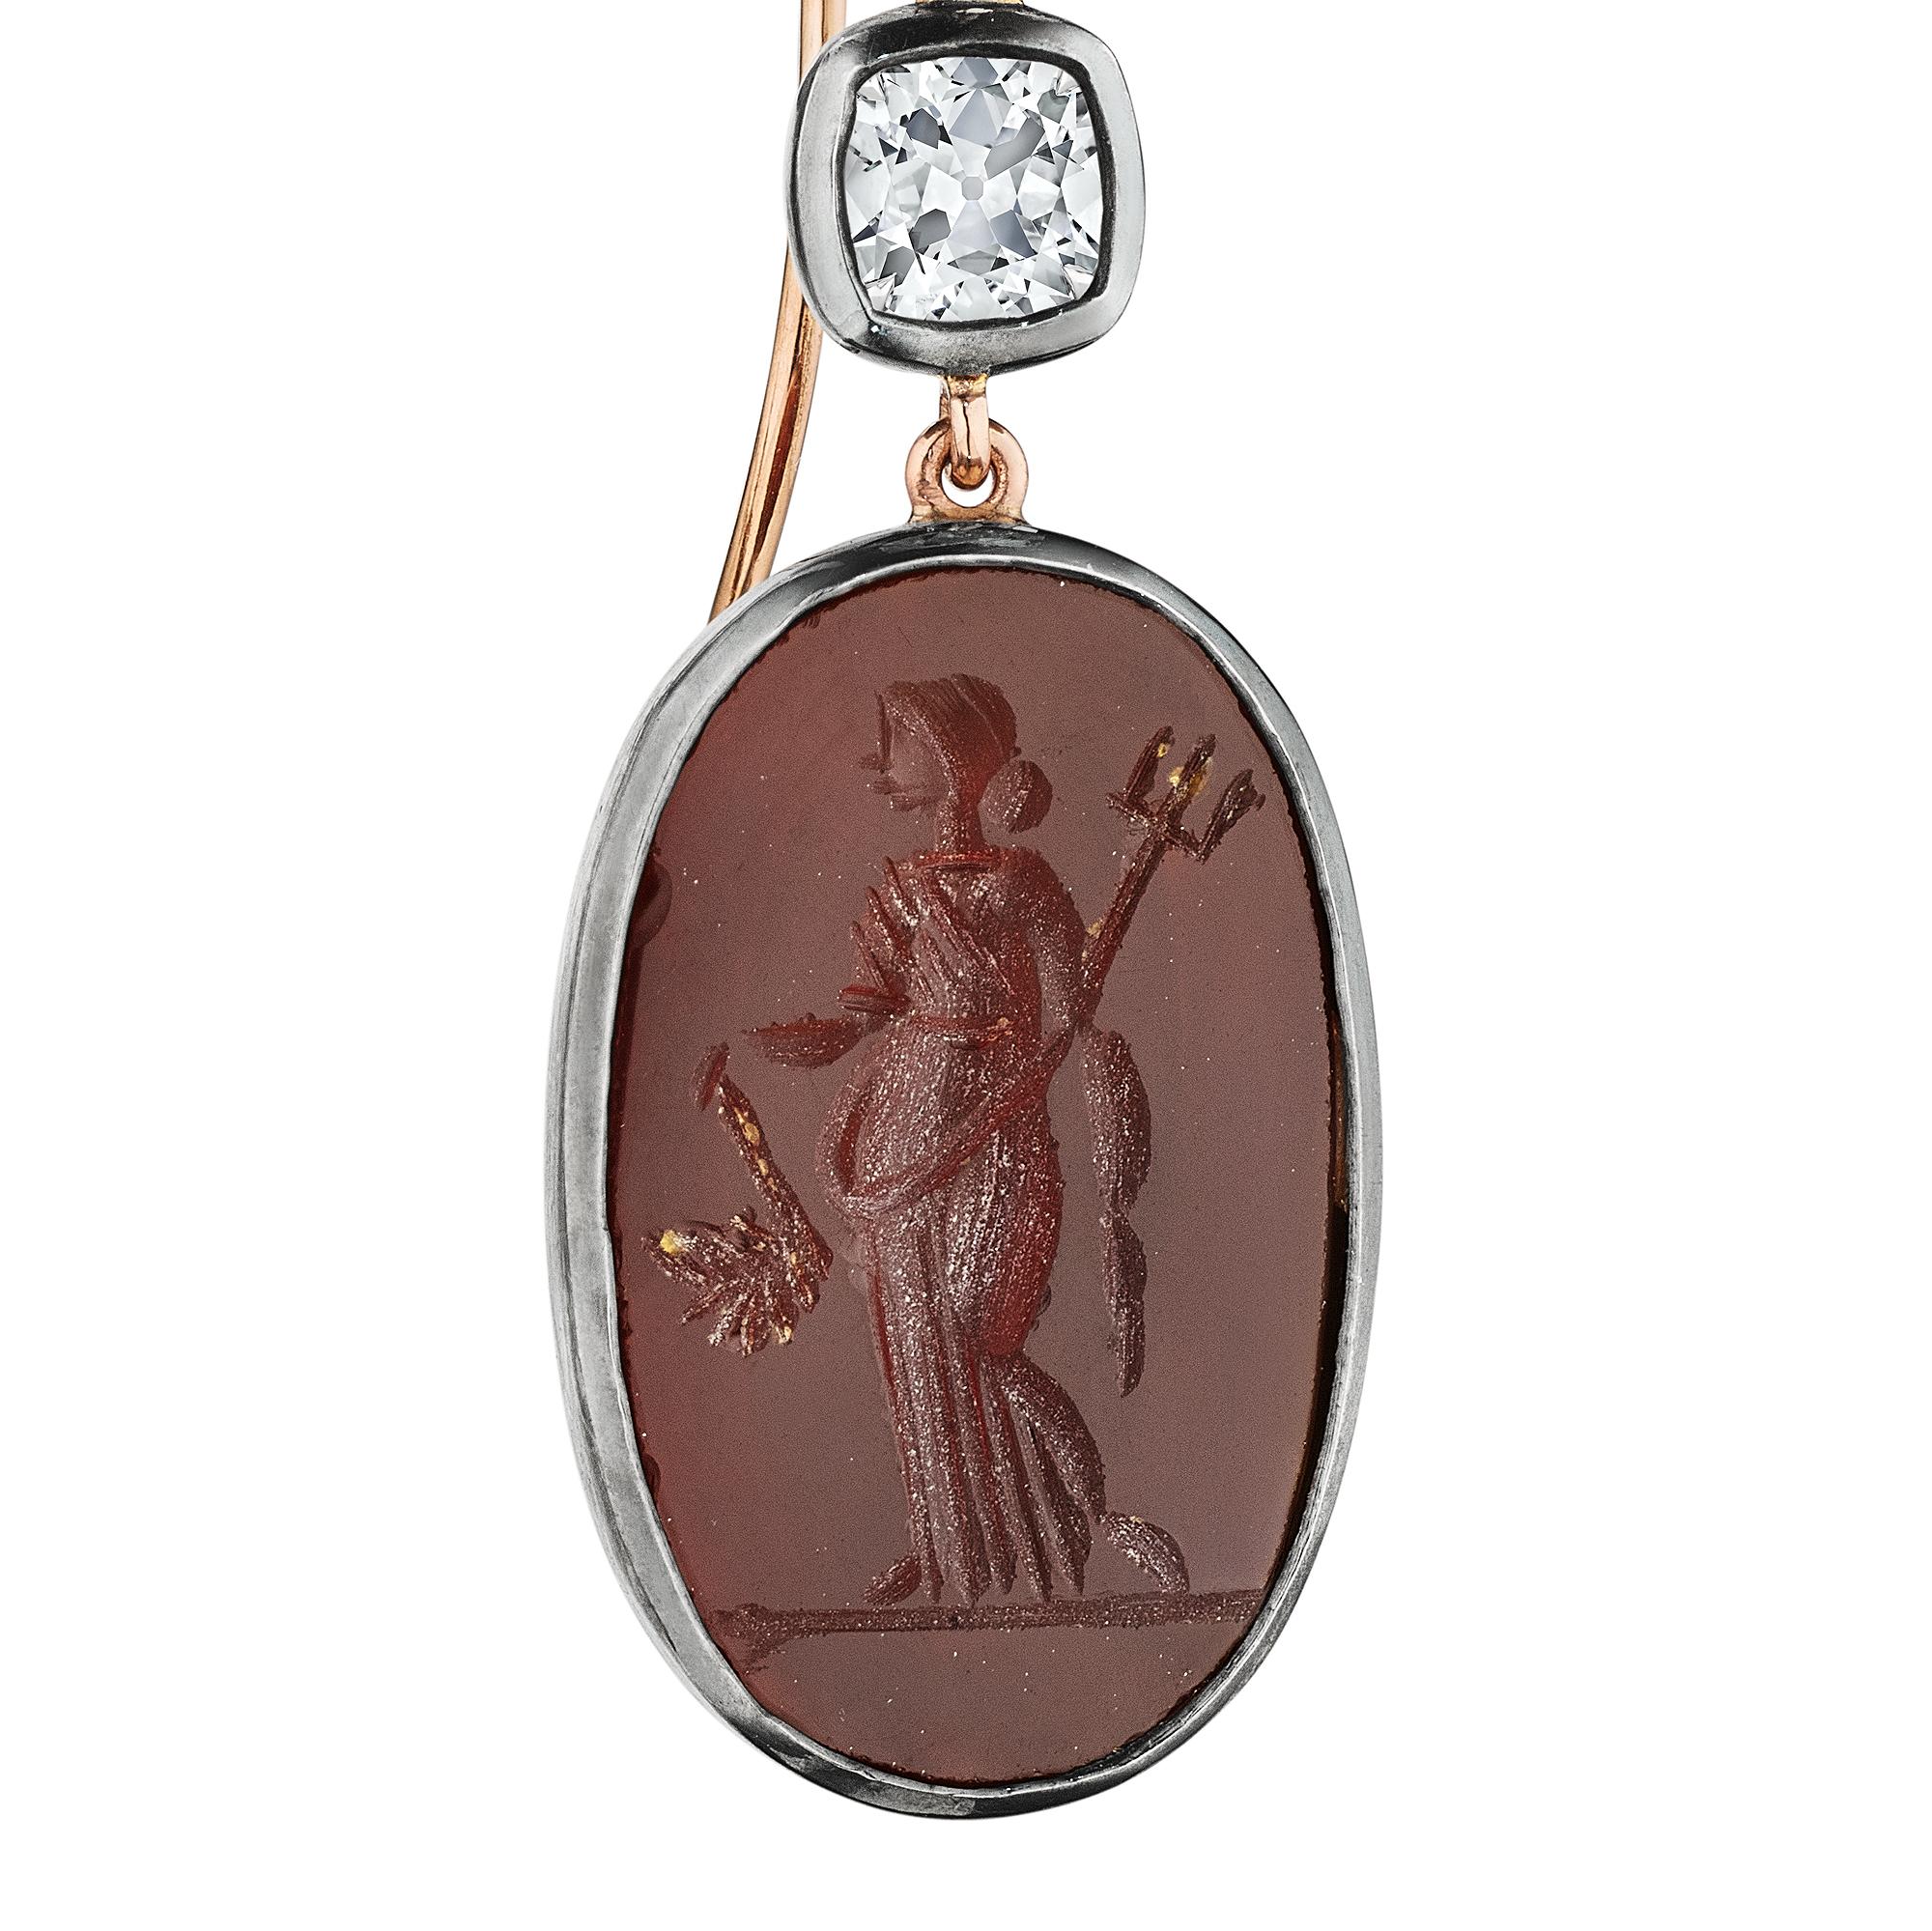 These oval cut antique carnelian intaglio hardstone earrings feature the statuesque silhouettes of a warrior man and woman dressed in ancient garb and magically topped with bezel set cushion cut diamonds.  Hanging seductively from a 18 karat rose